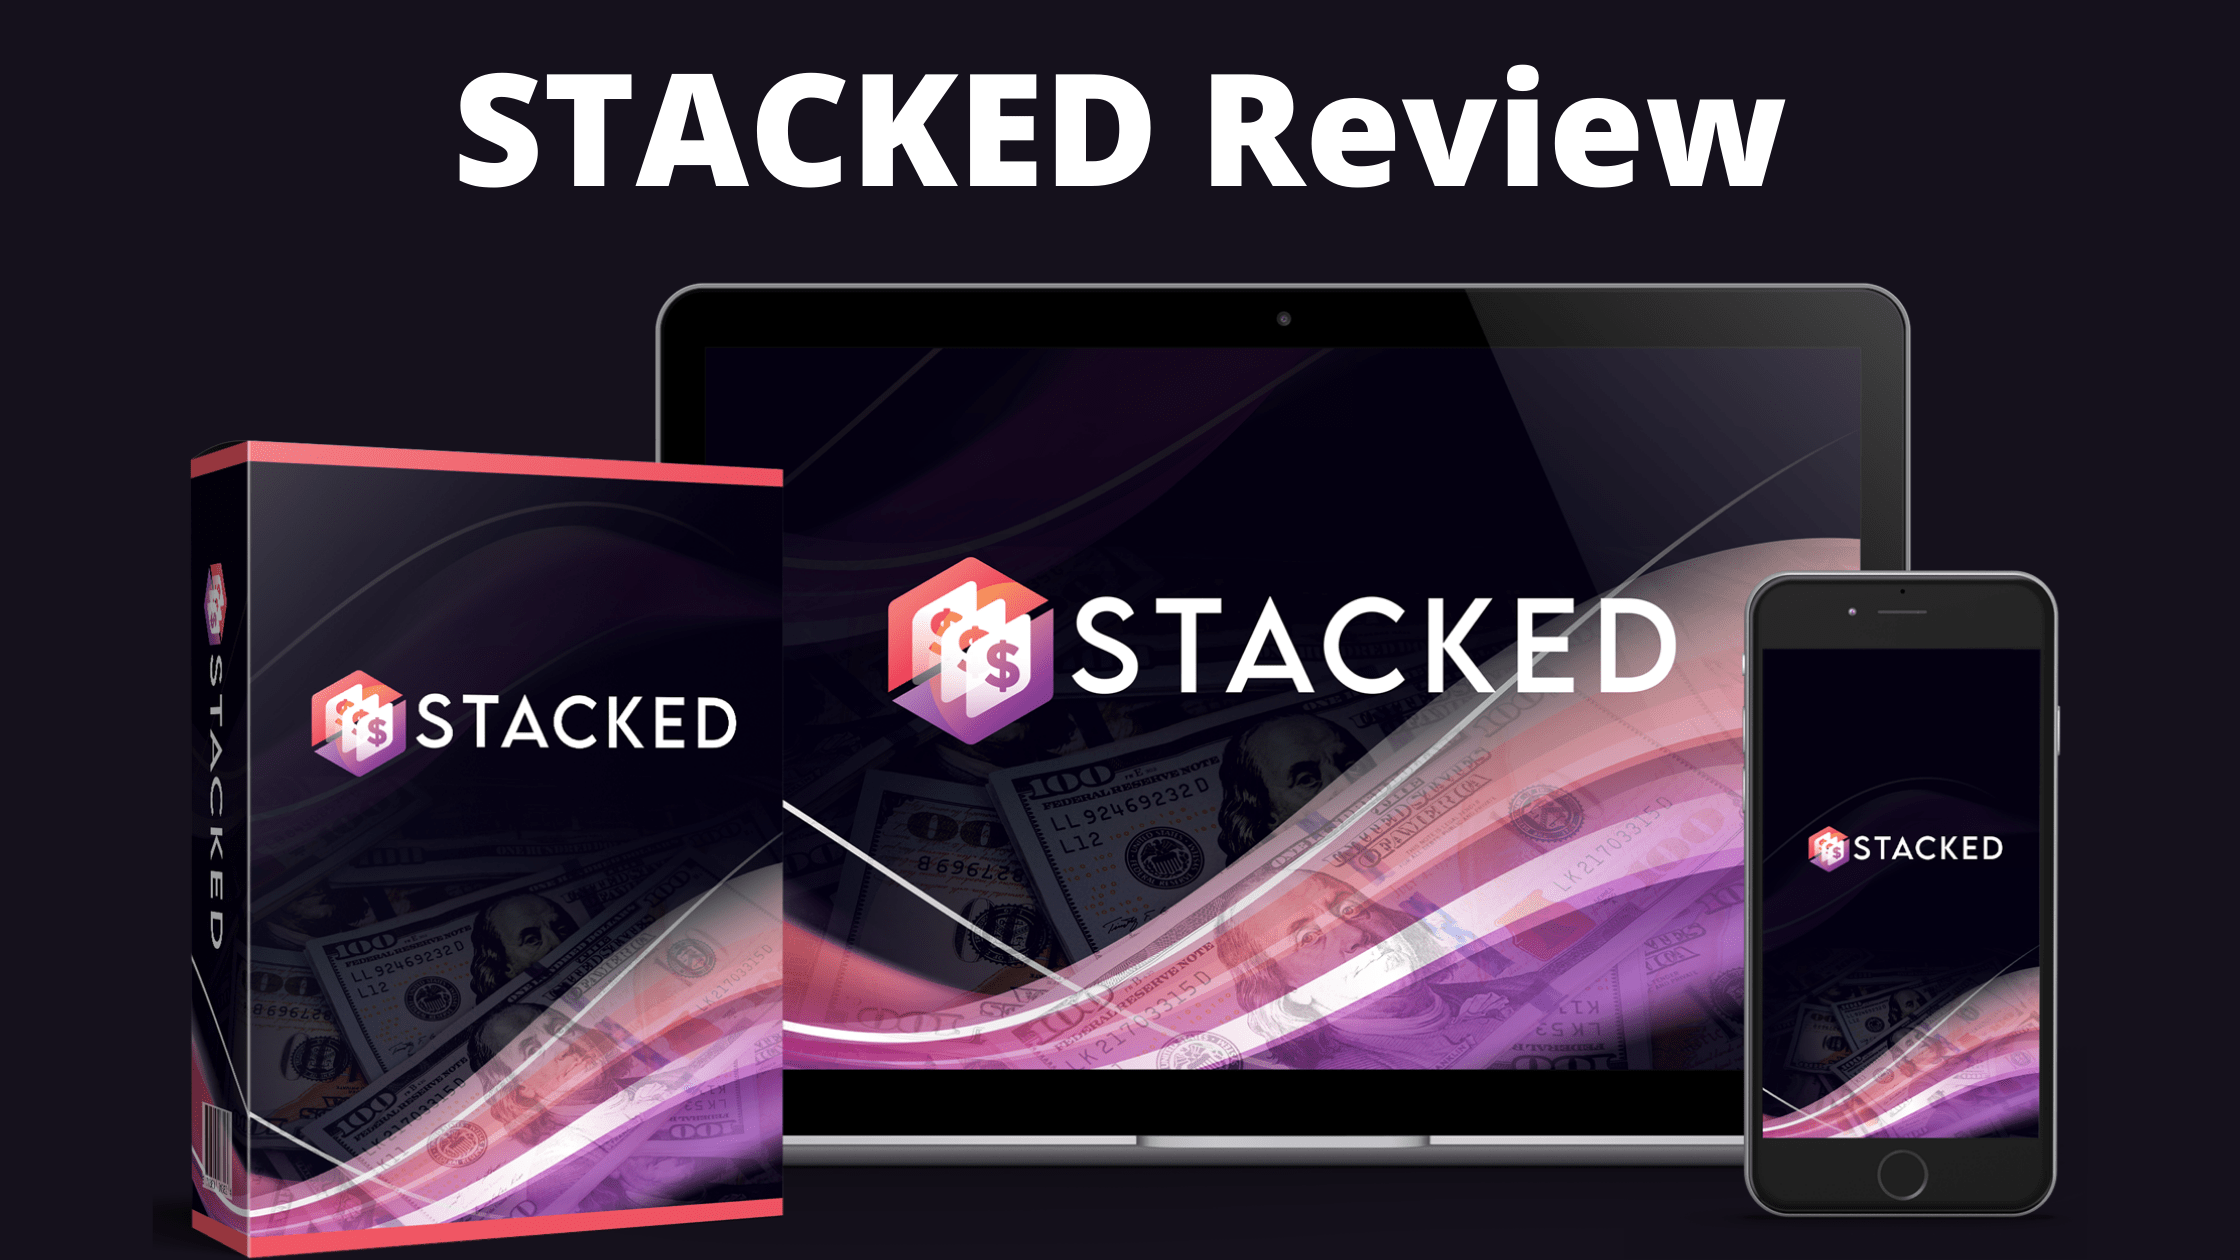 STACKED Review